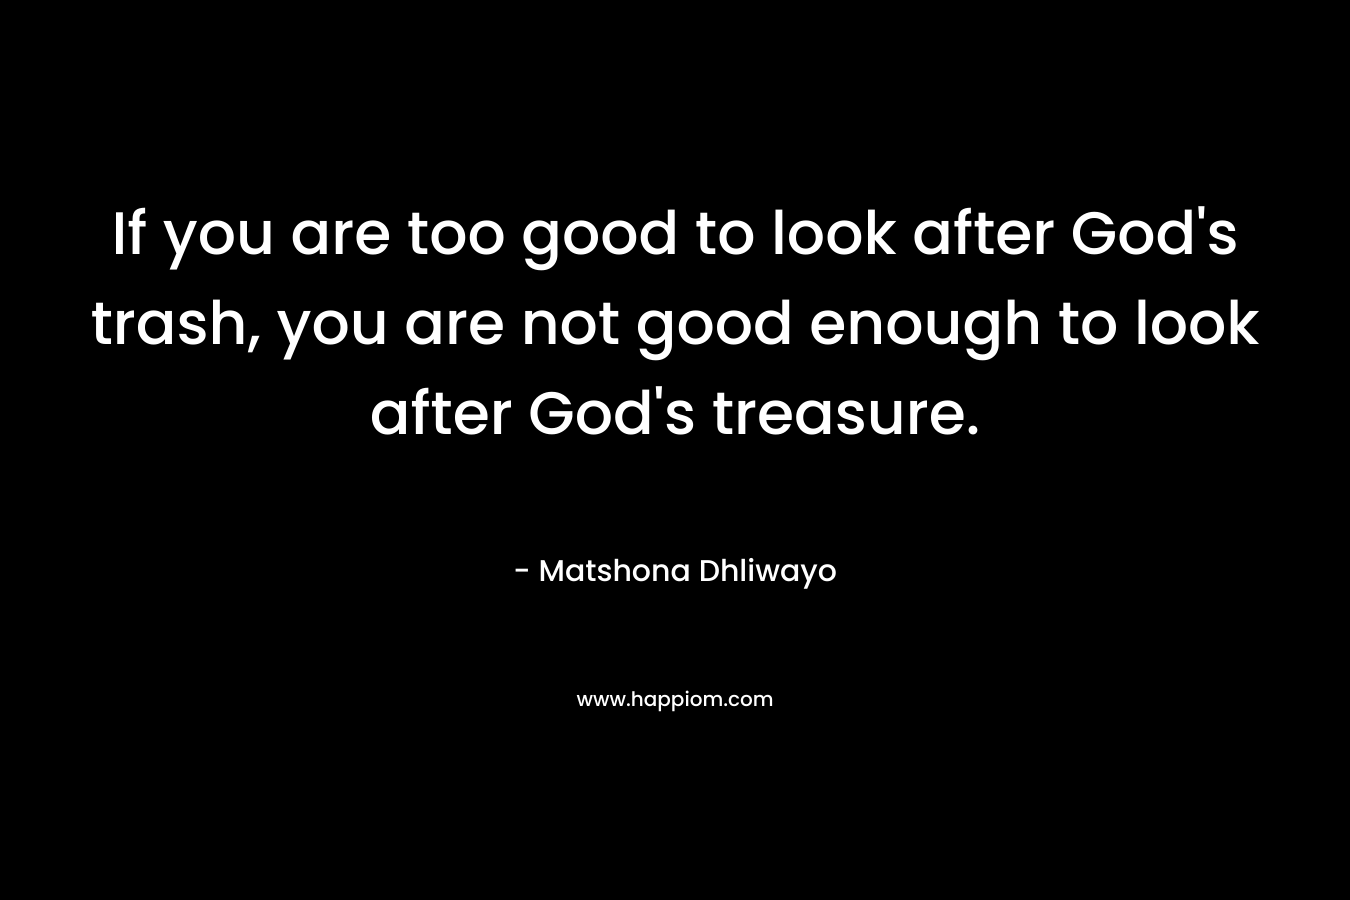 If you are too good to look after God’s trash, you are not good enough to look after God’s treasure. – Matshona Dhliwayo